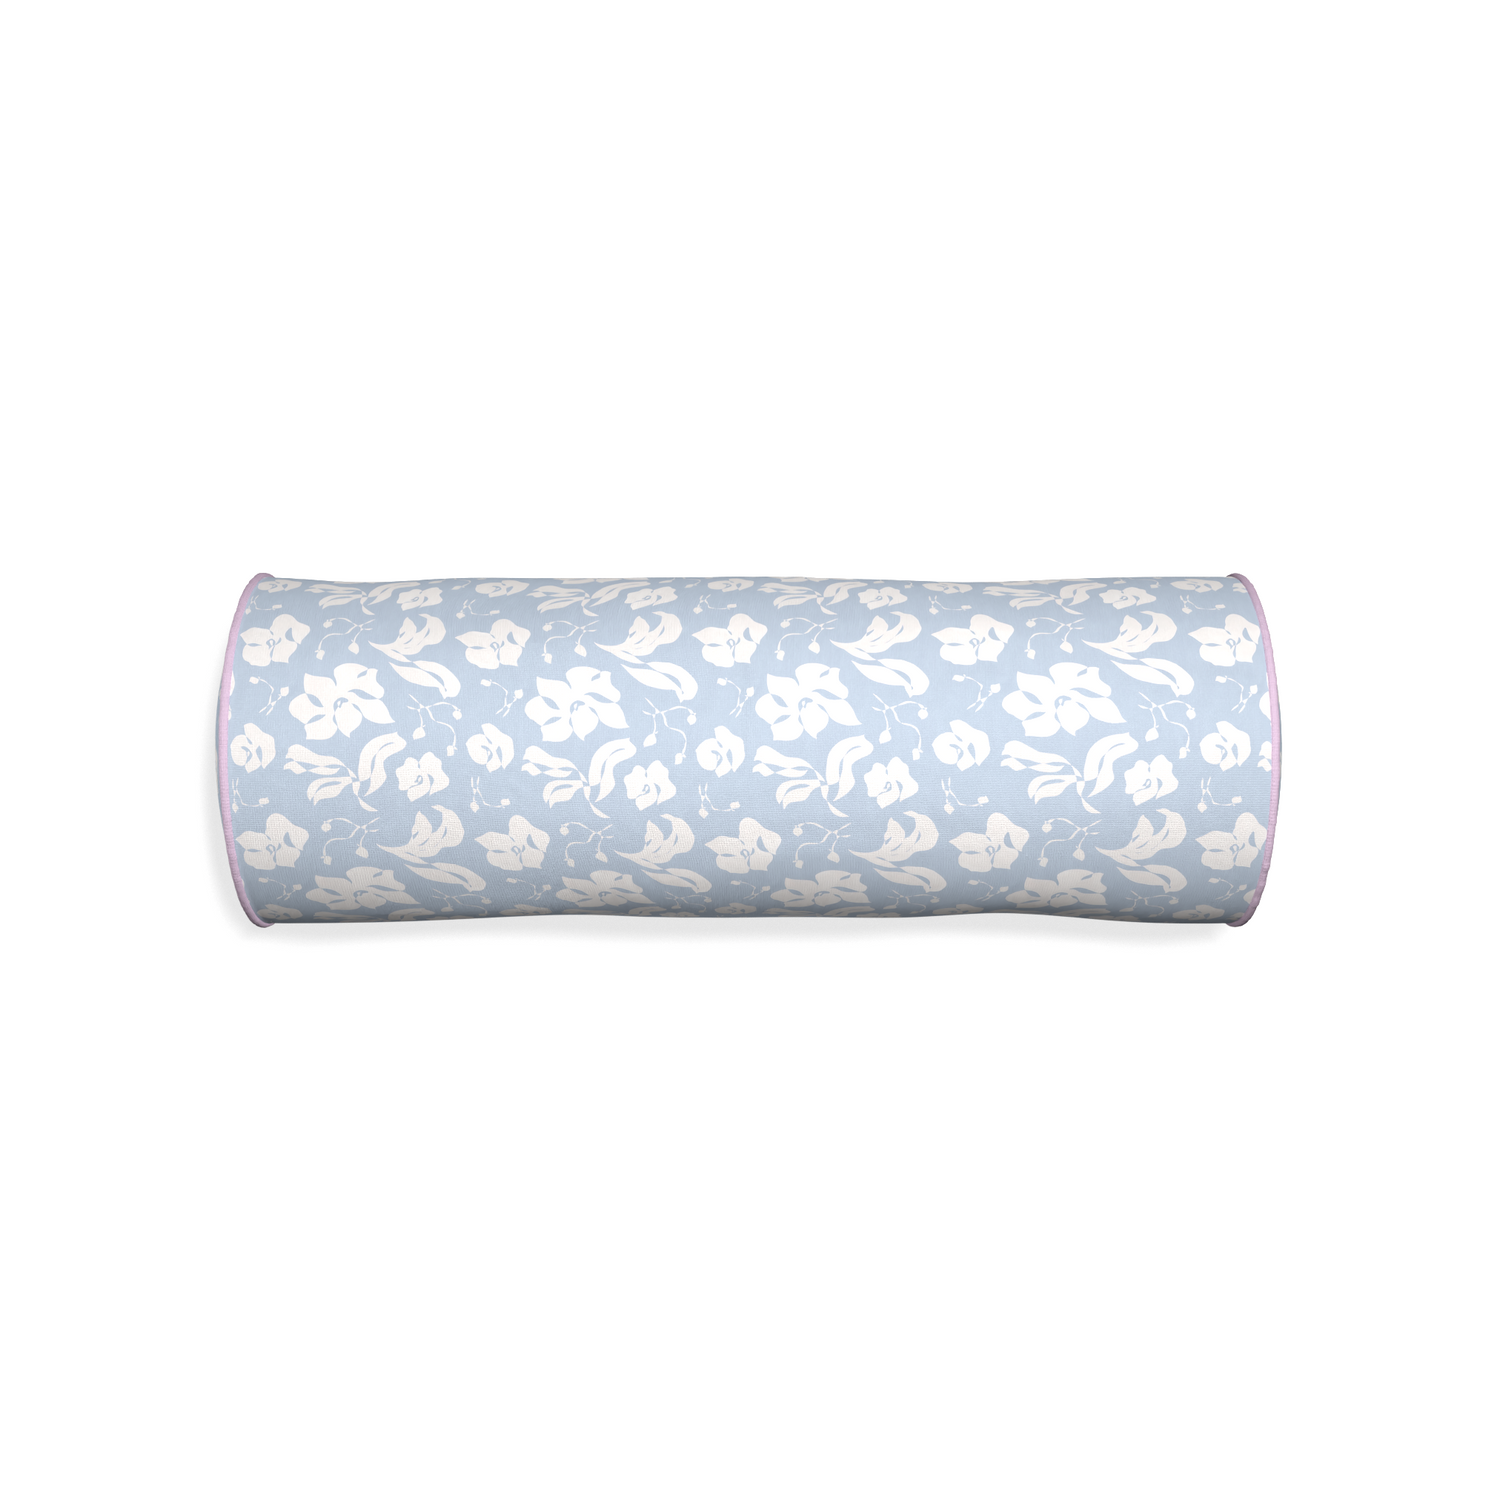 Bolster georgia custom cornflower blue floralpillow with l piping on white background